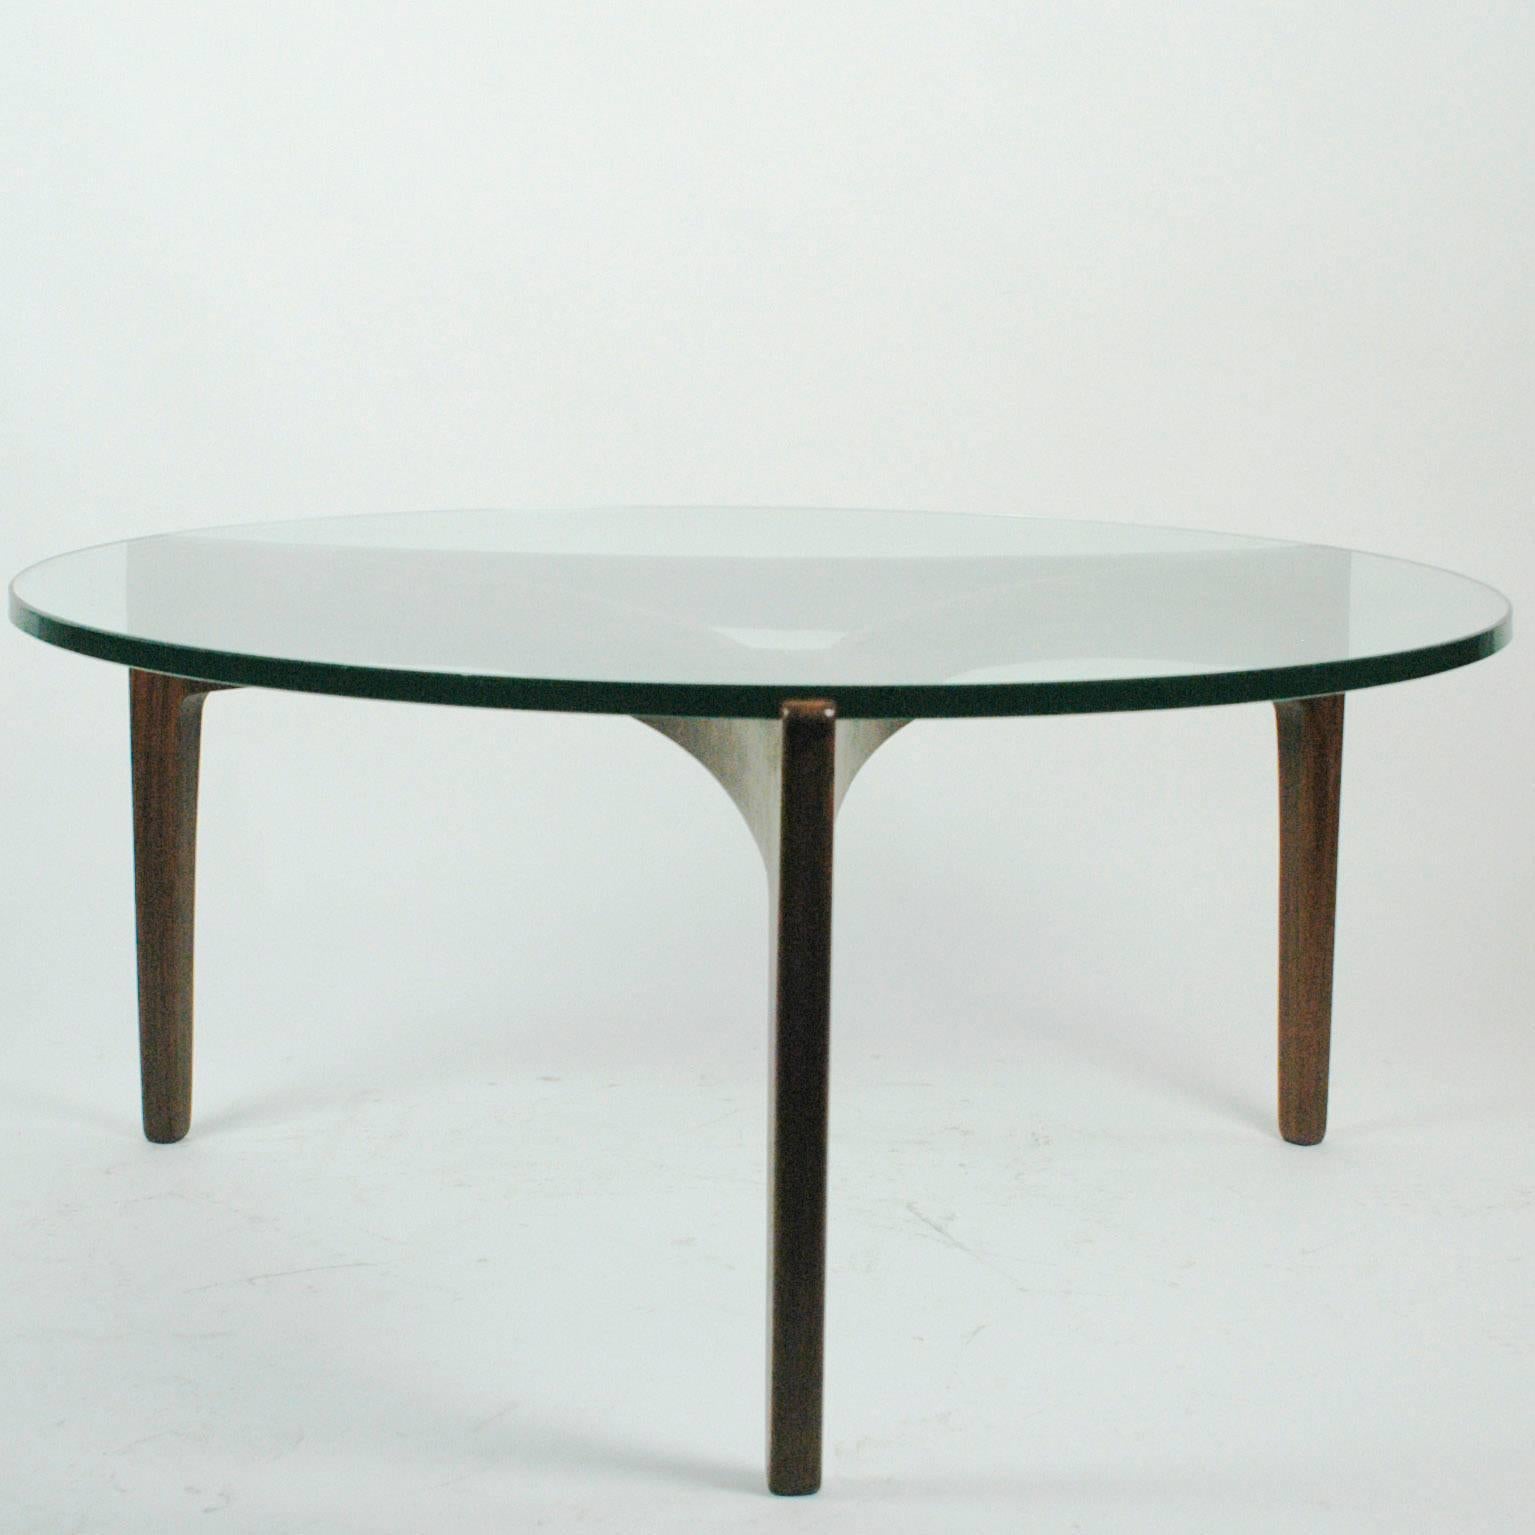 Excellent three legged Scandinavian Modern glass and rosewood coffee table.